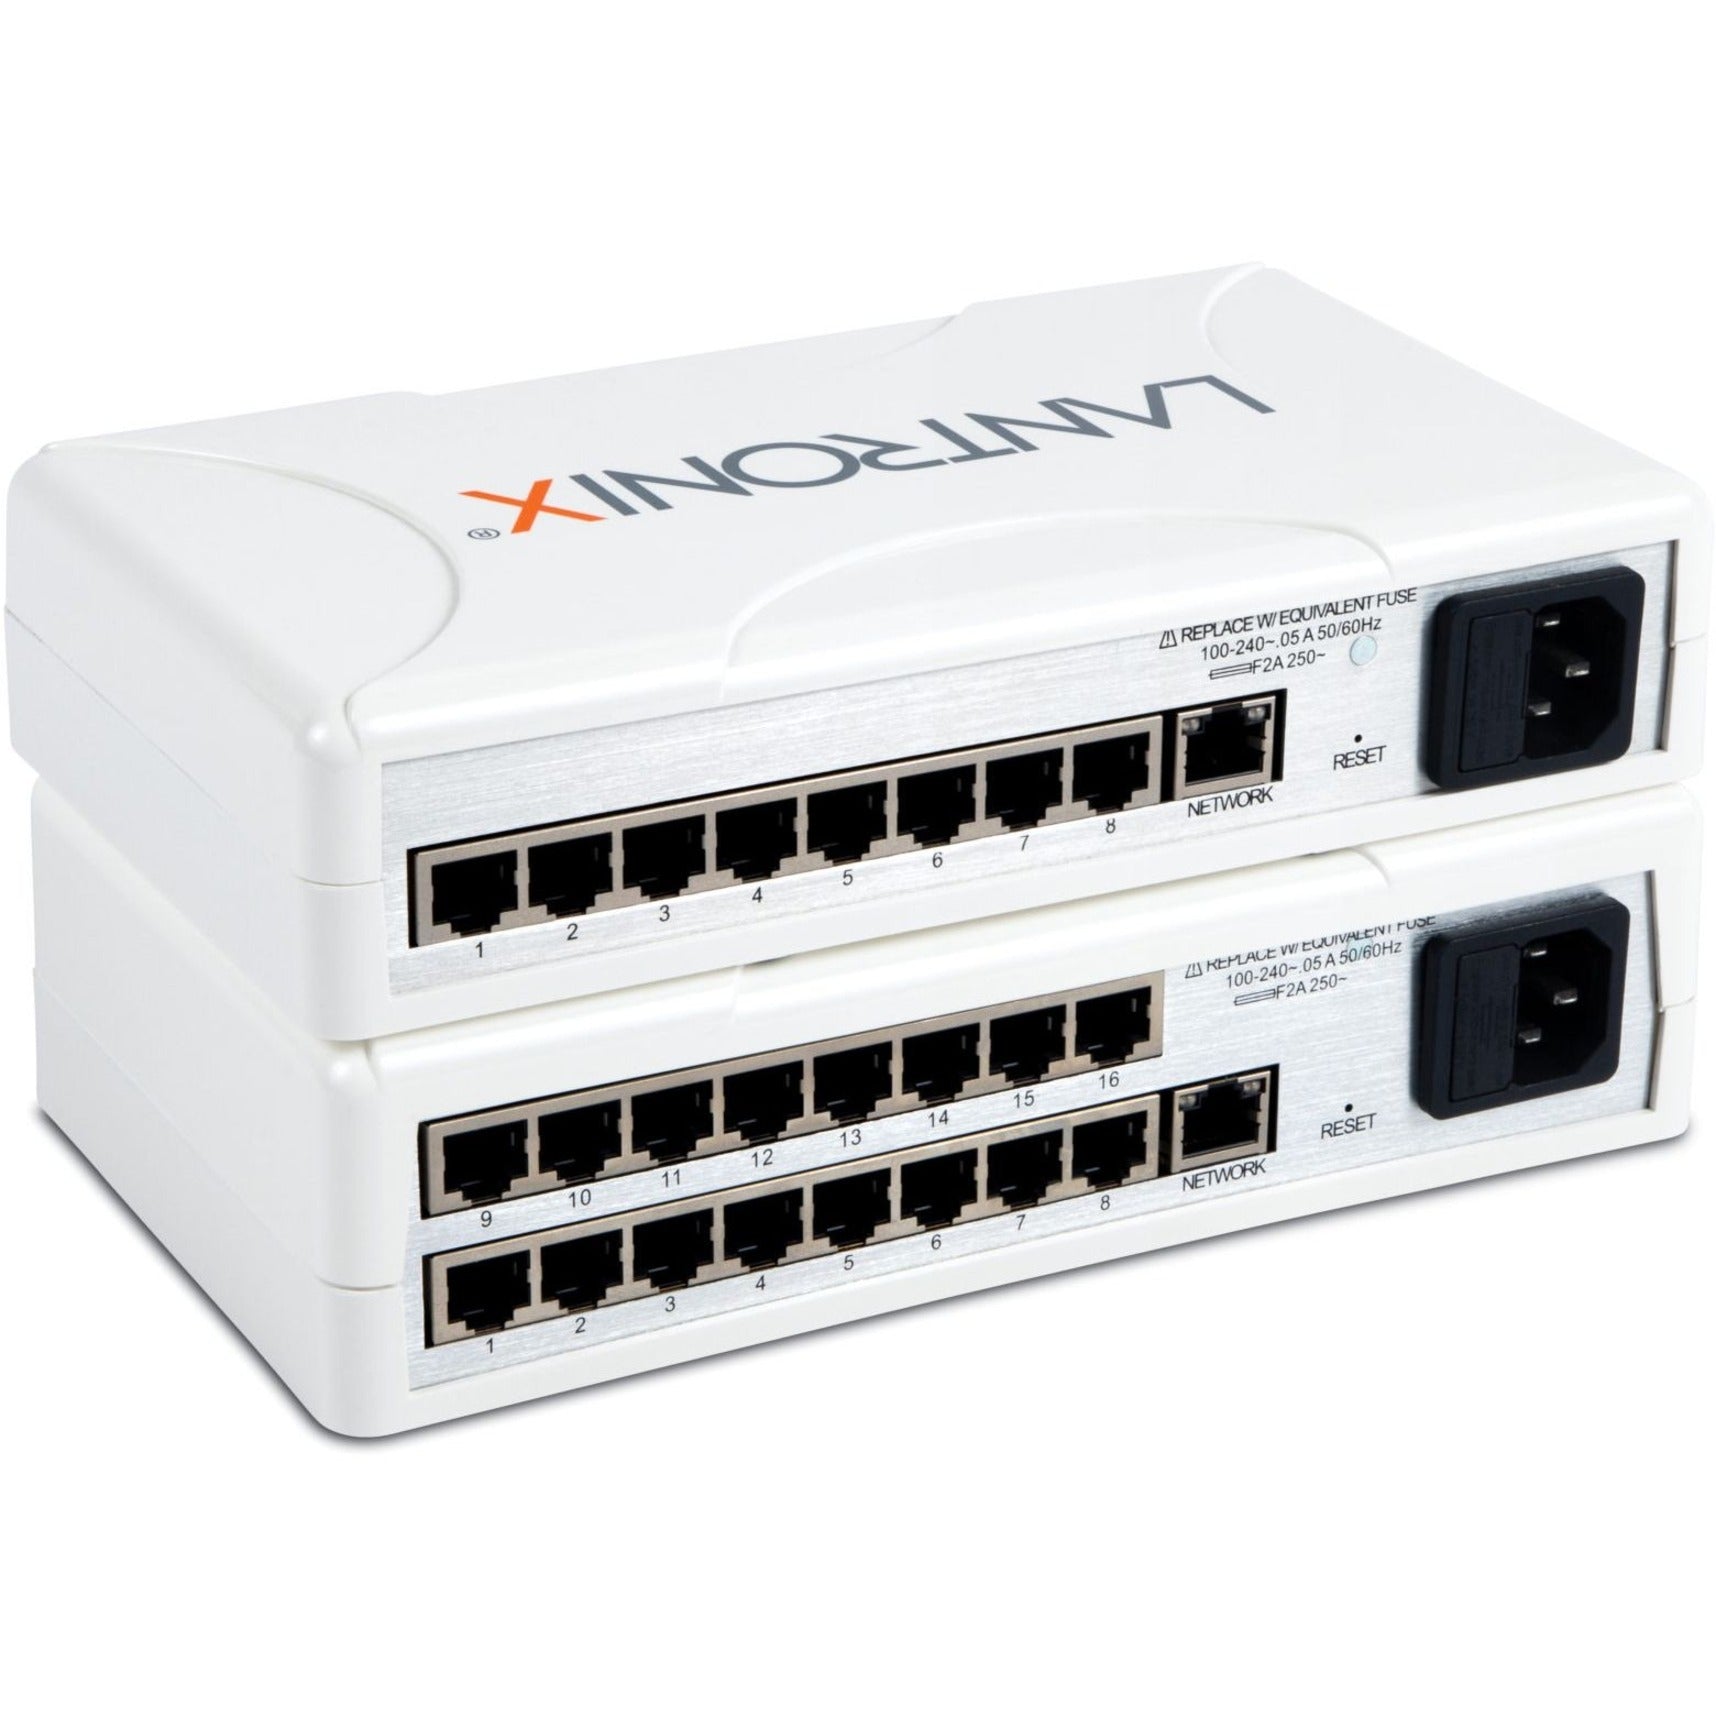 Lantronix EDS3008PS1NS EDS EDS3008PS Device Server, 8 Serial Ports, Gigabit Ethernet, 512MB Memory, 2 Year Warranty